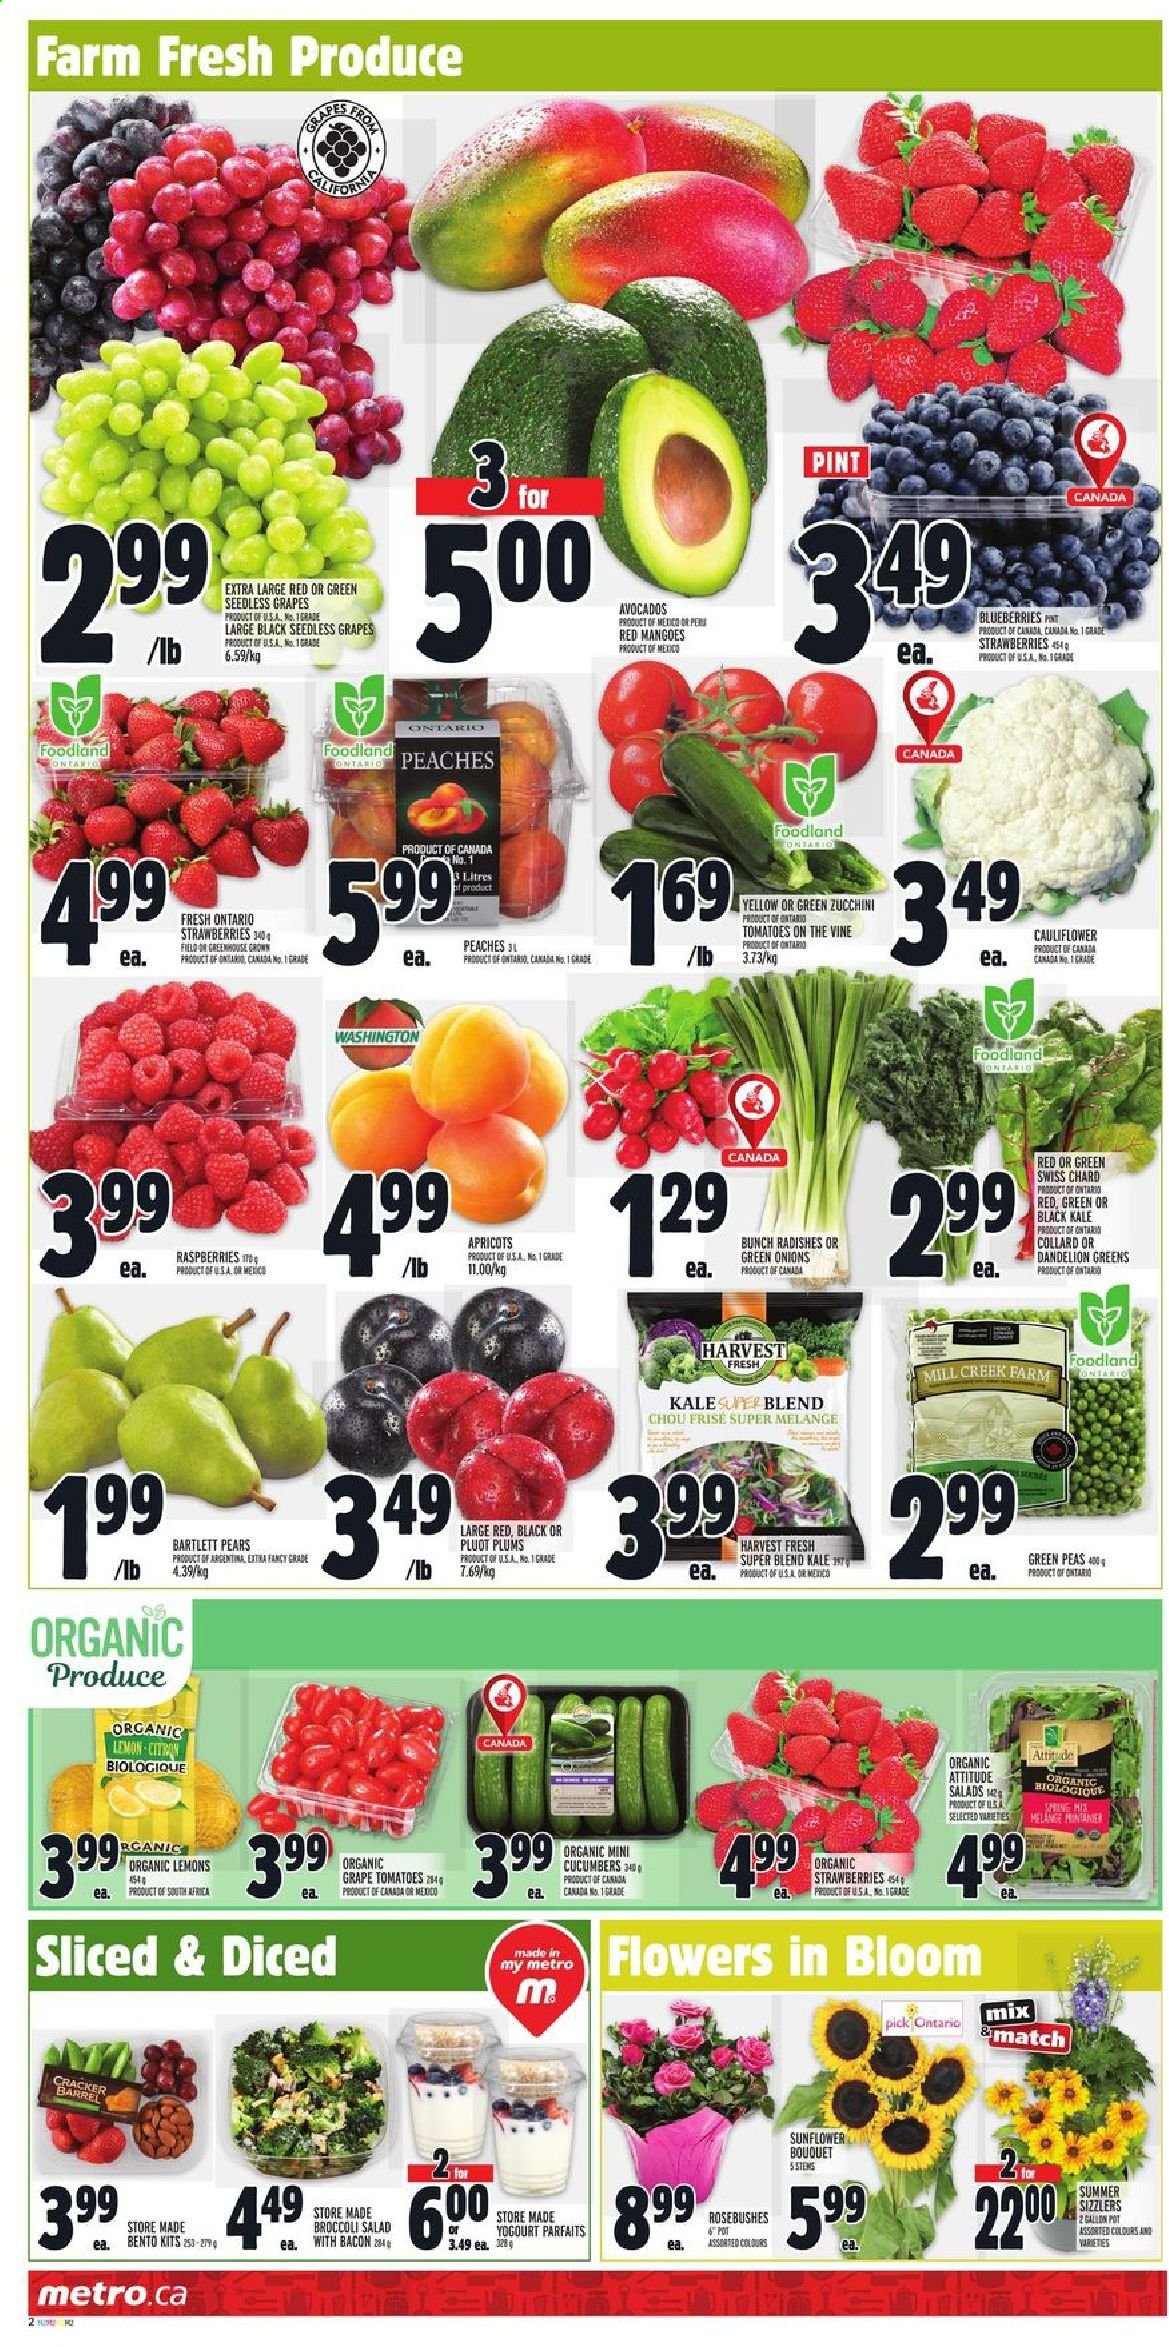 thumbnail - Metro Flyer - July 22, 2021 - July 28, 2021 - Sales products - broccoli, cauliflower, cucumber, radishes, tomatoes, zucchini, kale, peas, salad, green onion, avocado, Bartlett pears, seedless grapes, strawberries, plums, pears, apricots, lemons, peaches, crackers, pot, chard, sunflower. Page 2.